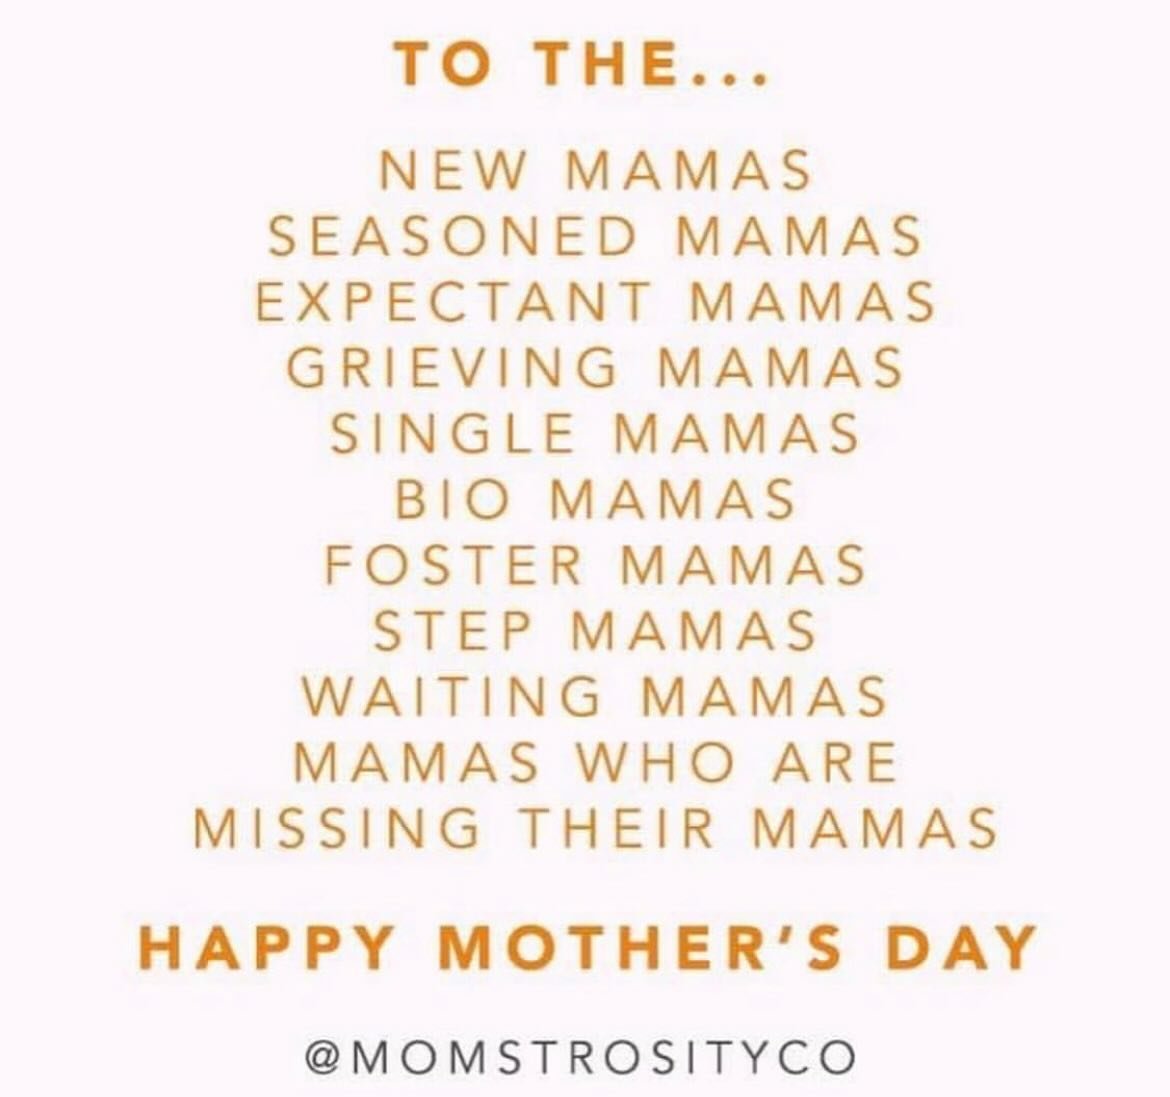 I&rsquo;ve shared this before but it holds true for what can be a complicated day - sending all the ❤️❤️ to all the women out there, no matter your journey. 🥰💐